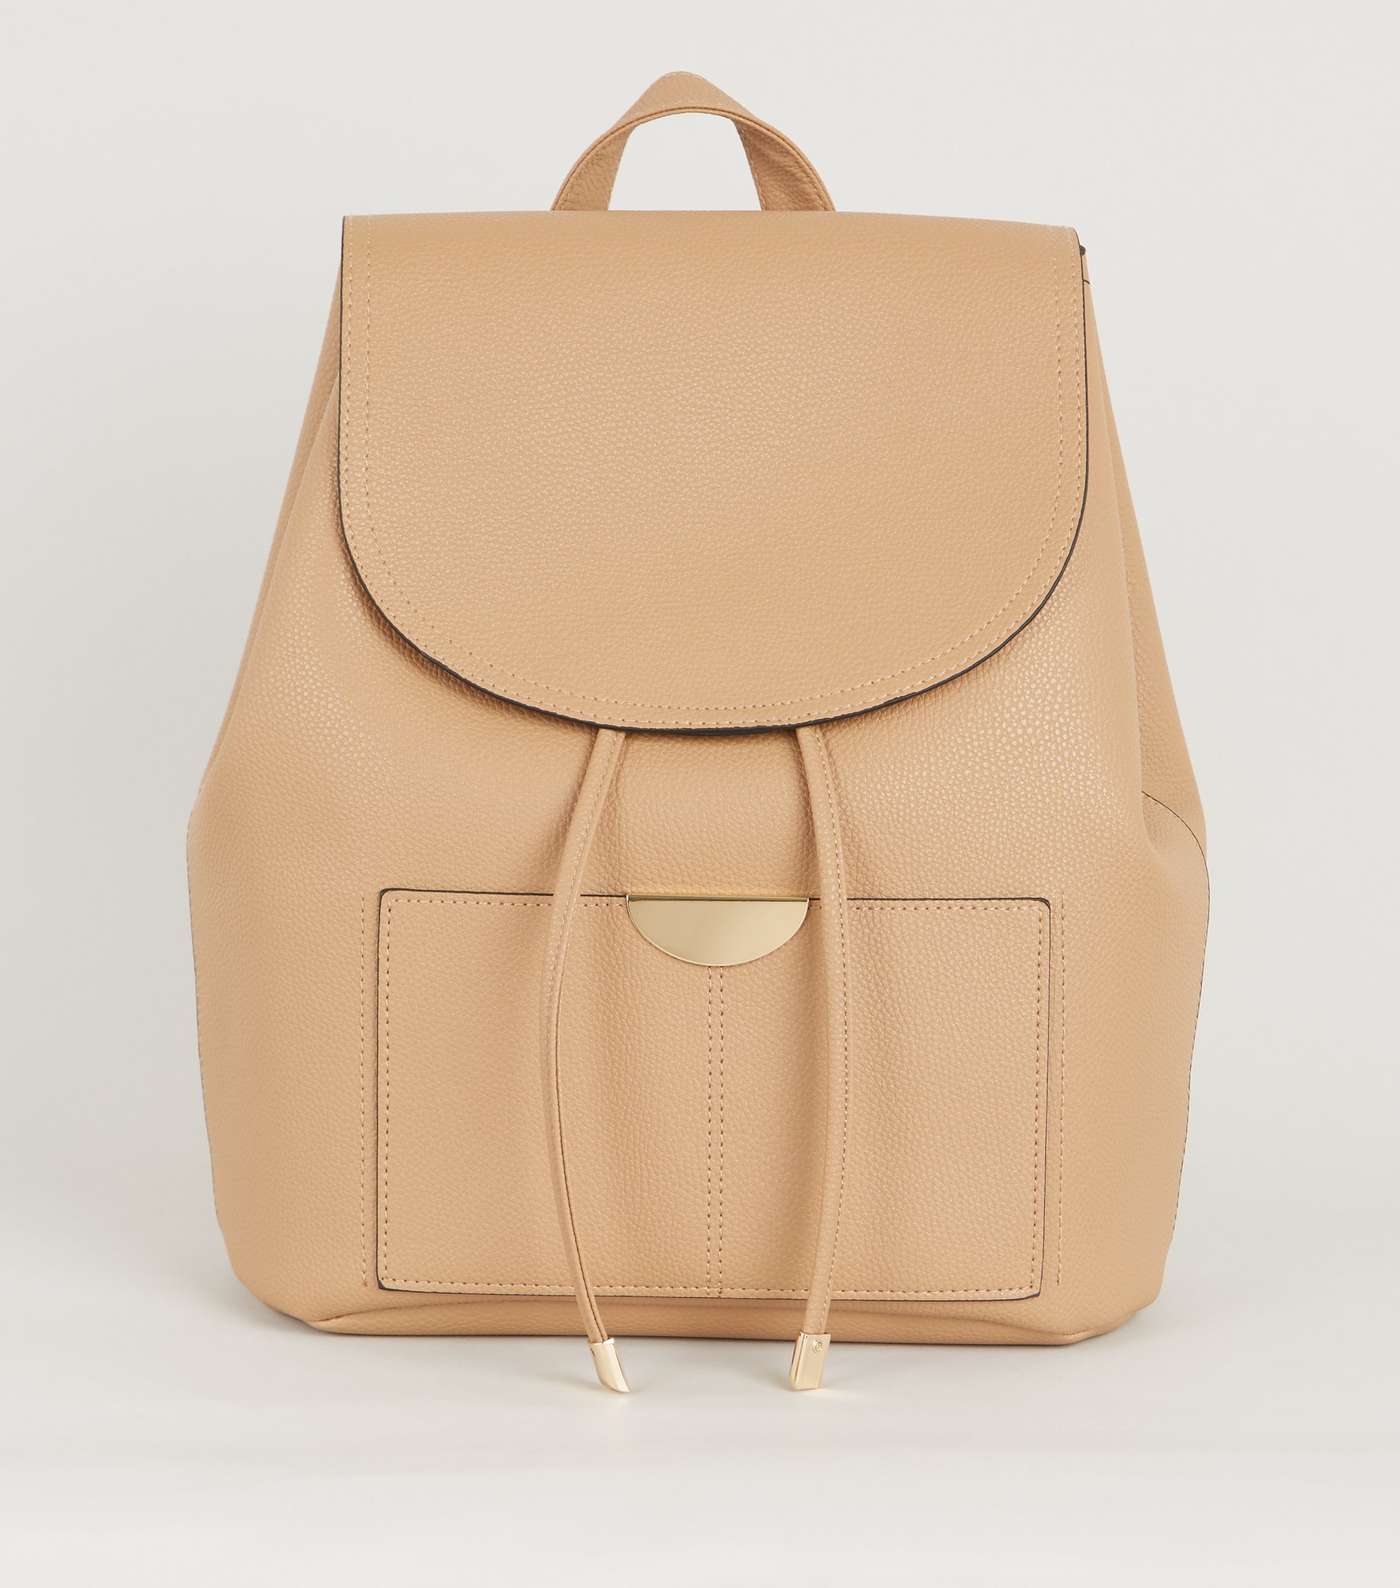 Camel Leather-Look Drawstring Backpack